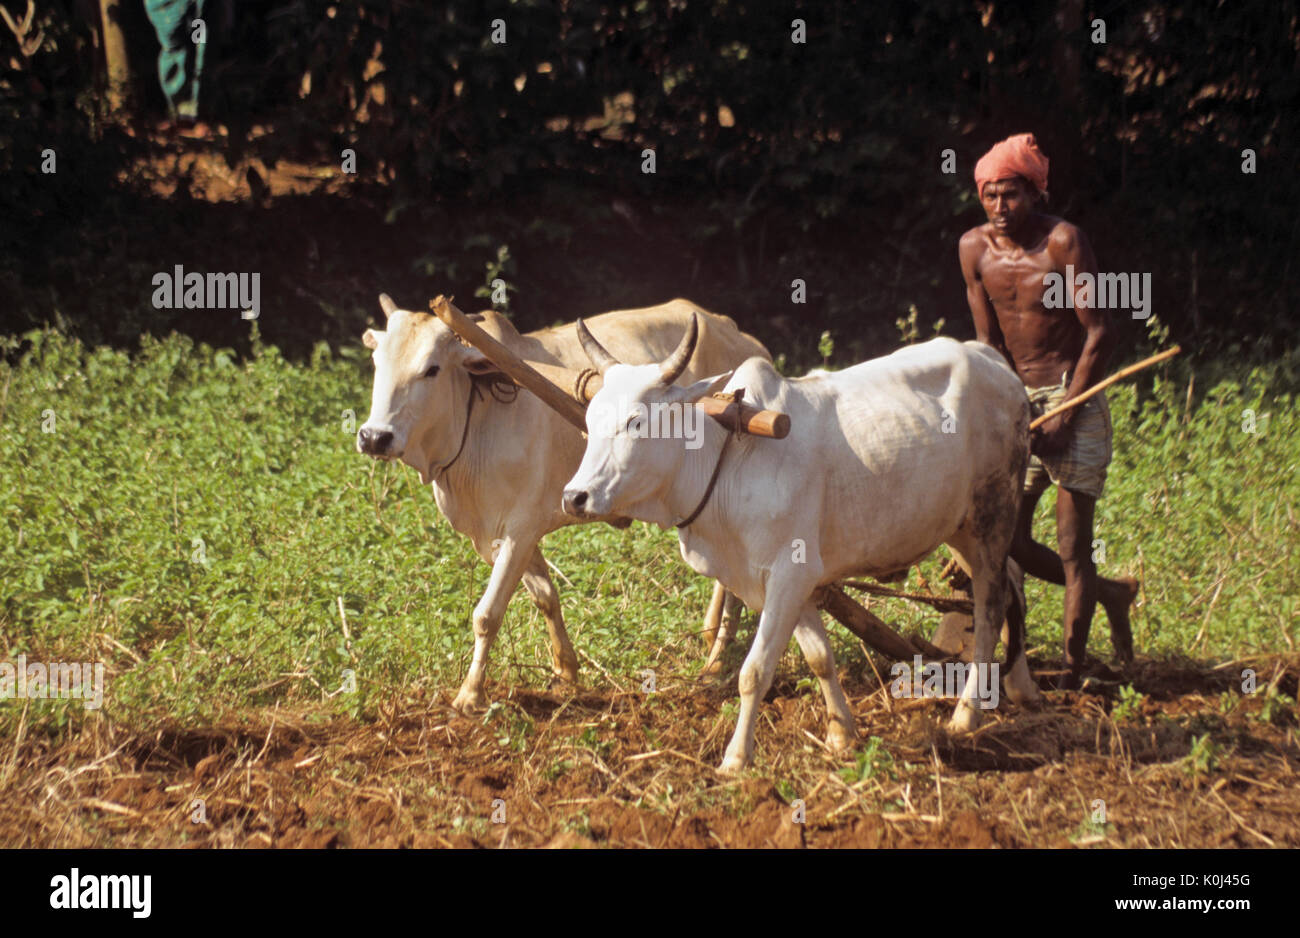 Farmer plowing field with oxen and wood plow, southern India Stock Photo